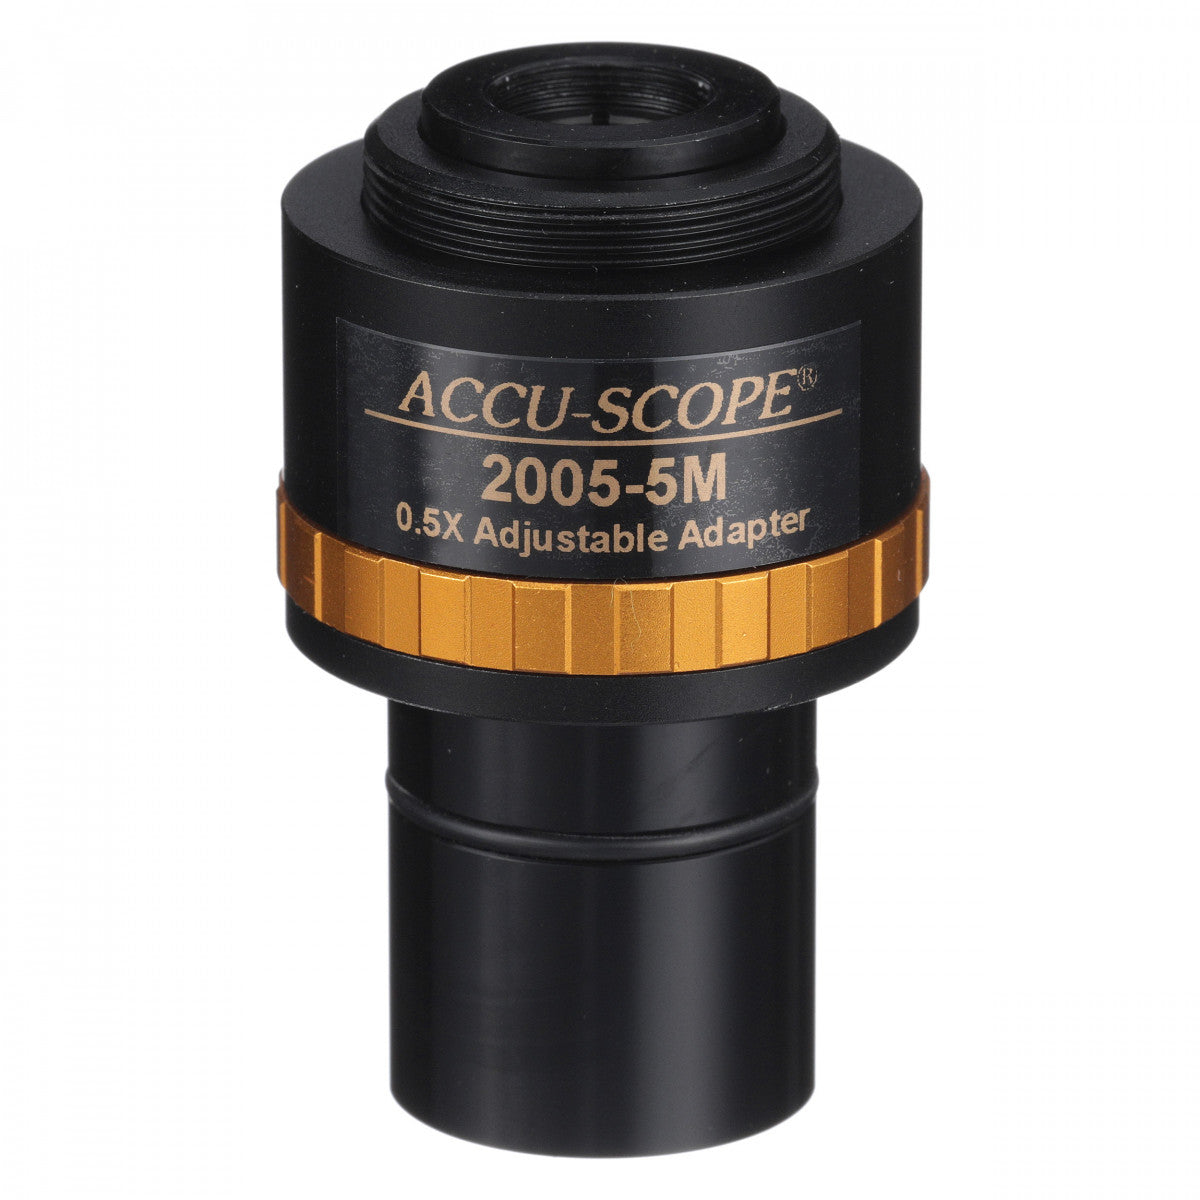 .Accu-Scope Camera and Video Adapters for 3078 Series